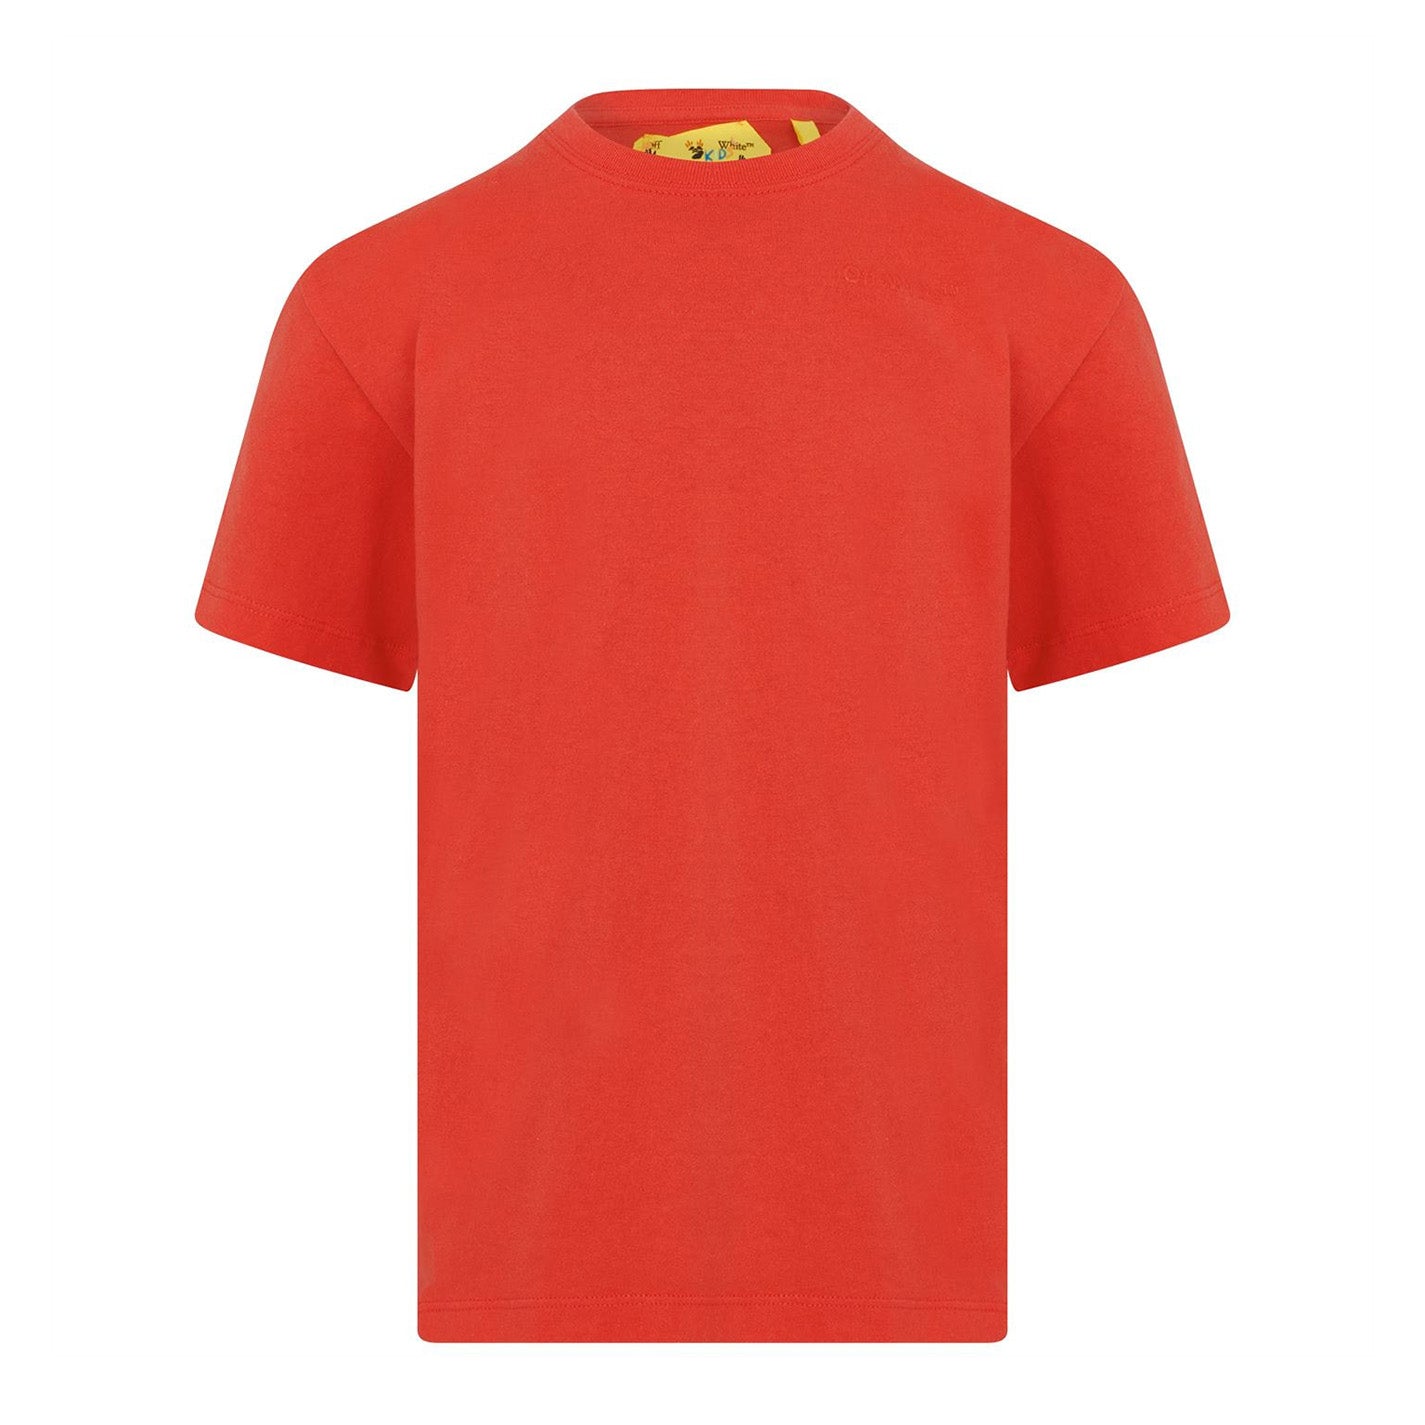 Kids Off-White Red T-Shirt - DANYOUNGUK